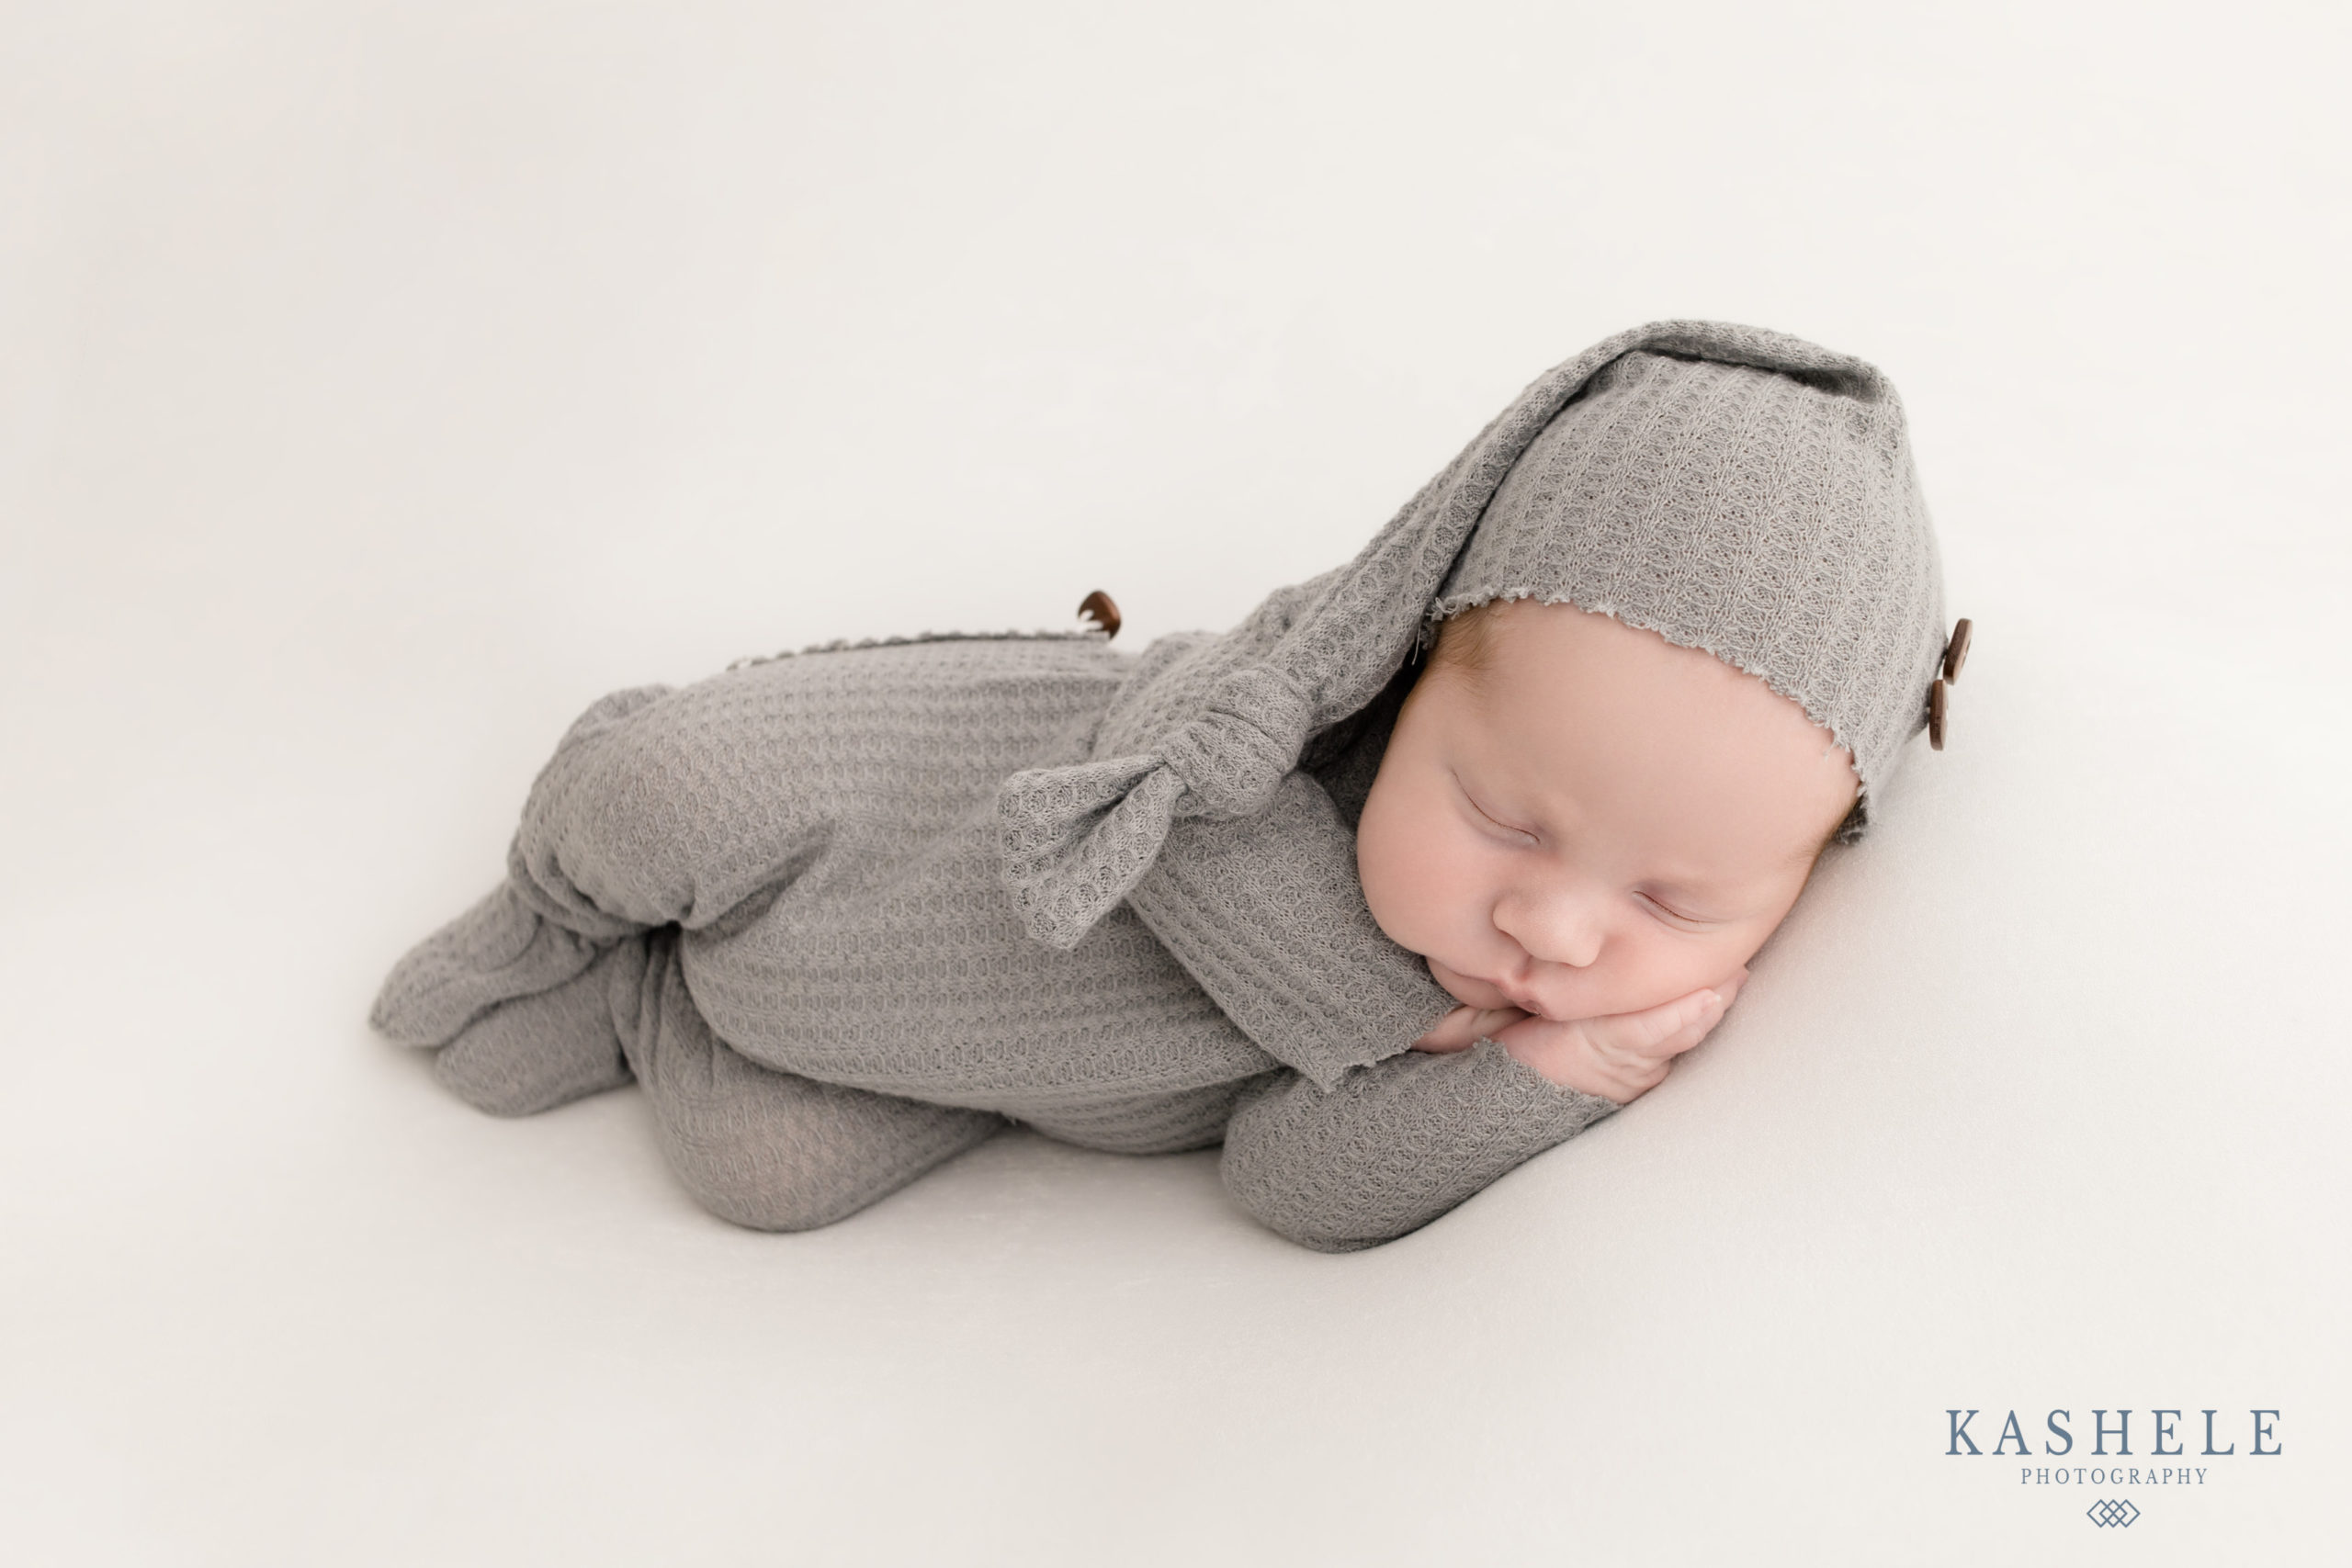 One Month Baby Photoshoot Ideas at Home - In The Playroom